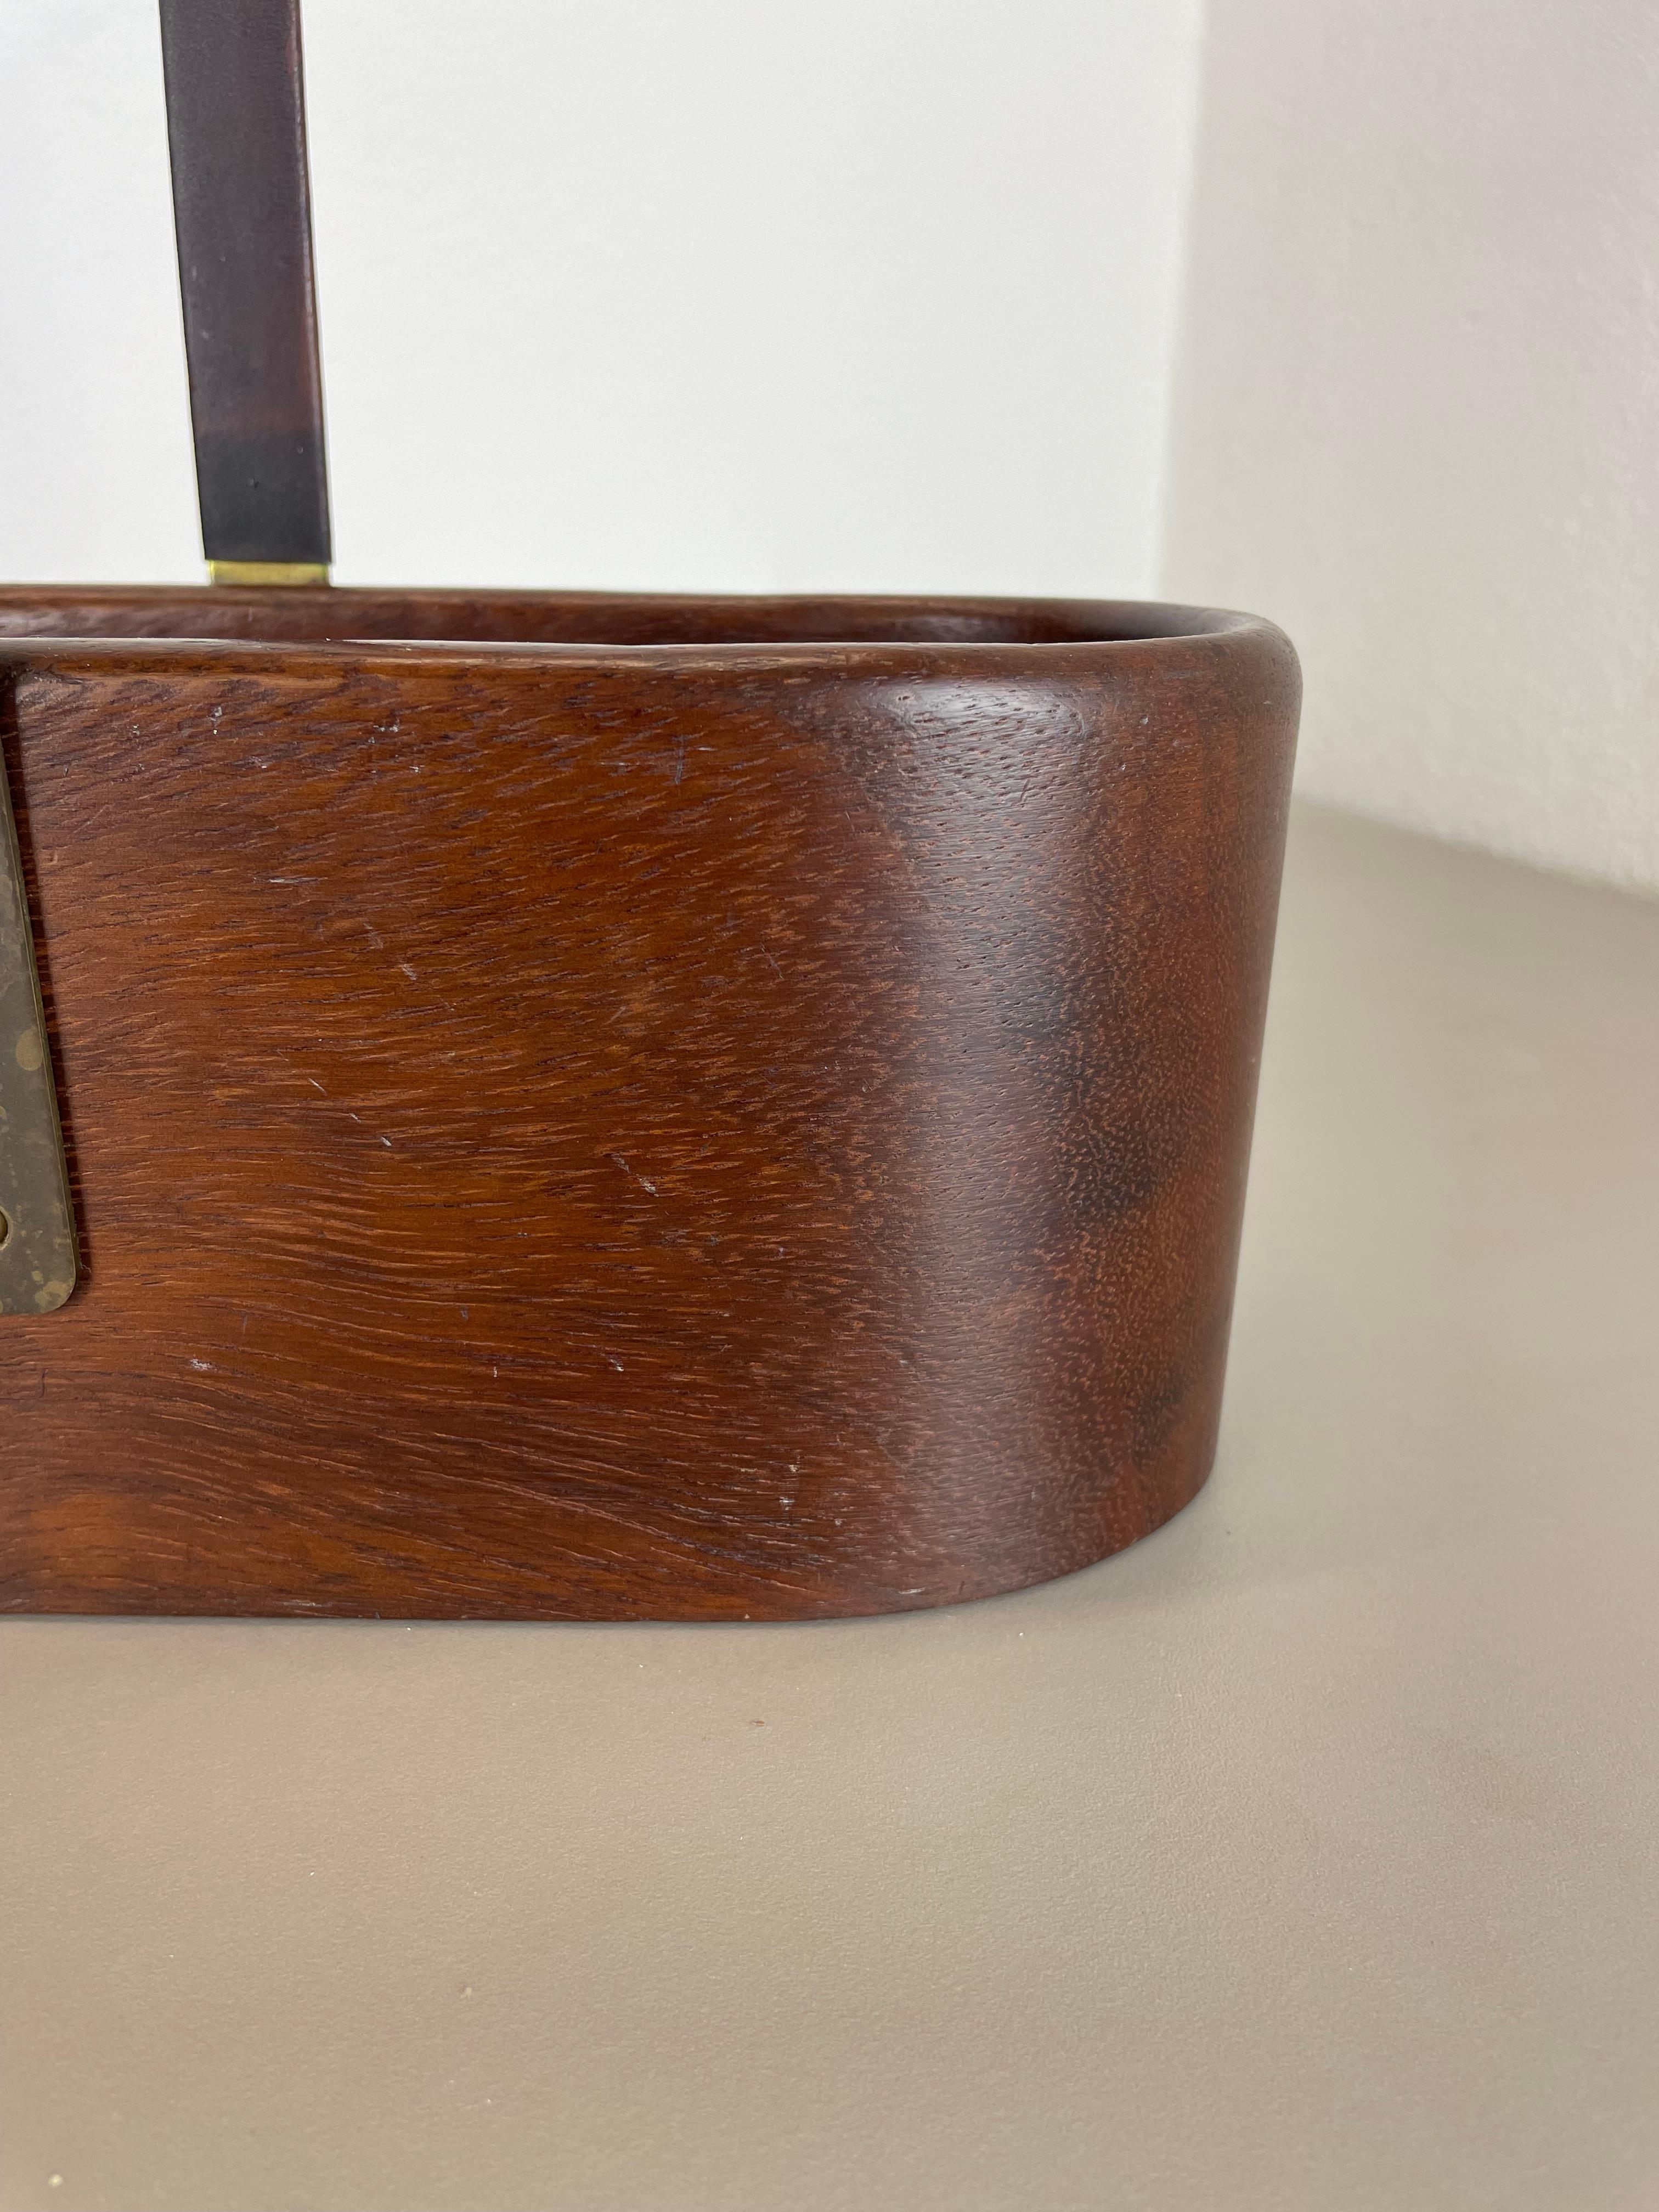 20th Century Teak Bottle Holder with Brass and Leather Handle by Carl Auböck, Austria, 1950s For Sale